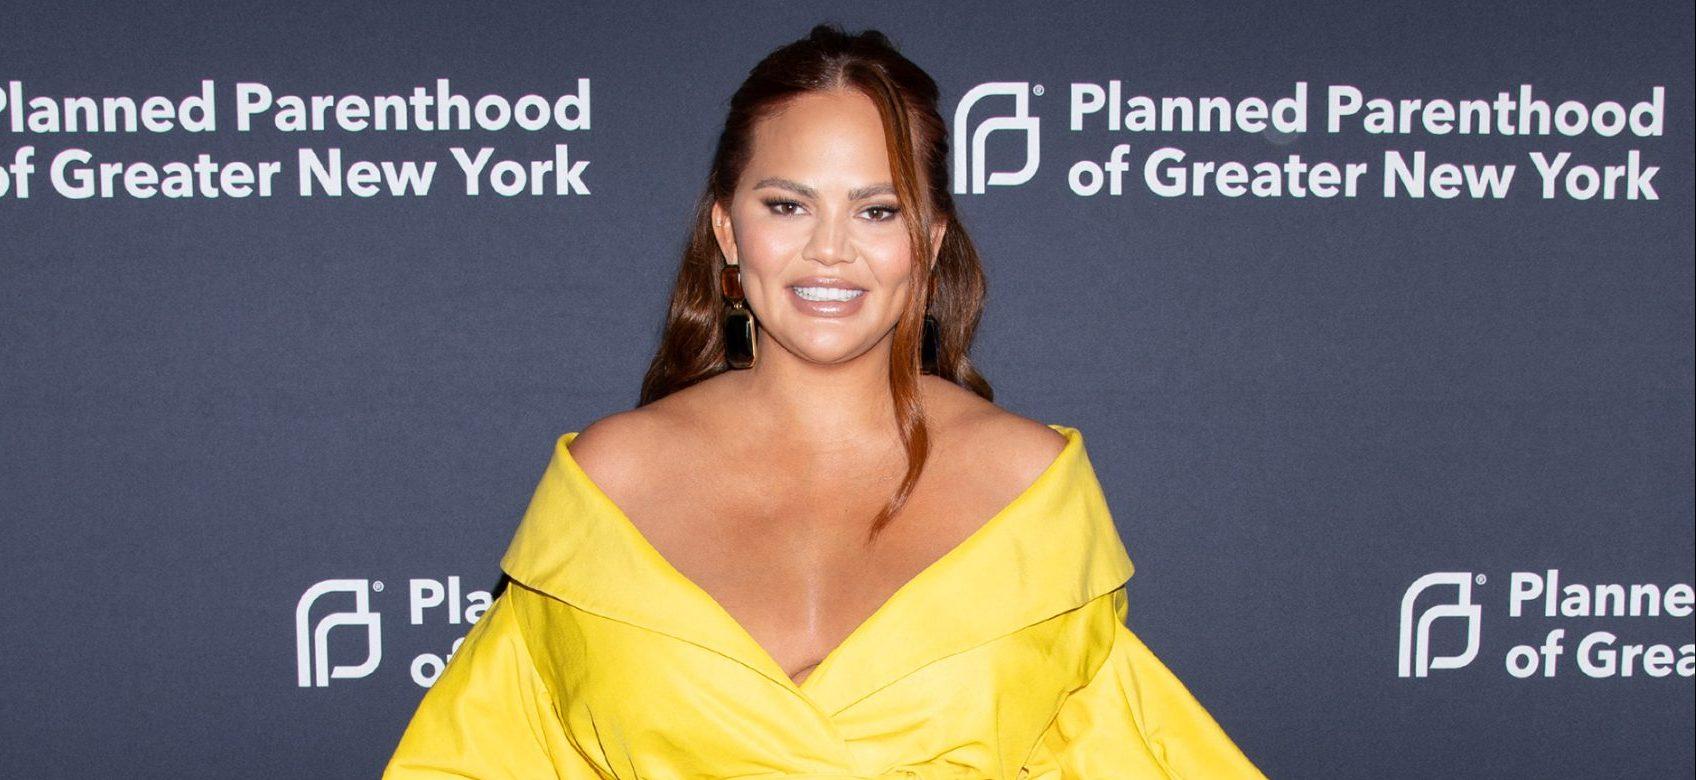 Chrissy Teigen And John Legend Quietly Welcome Baby No. 4!